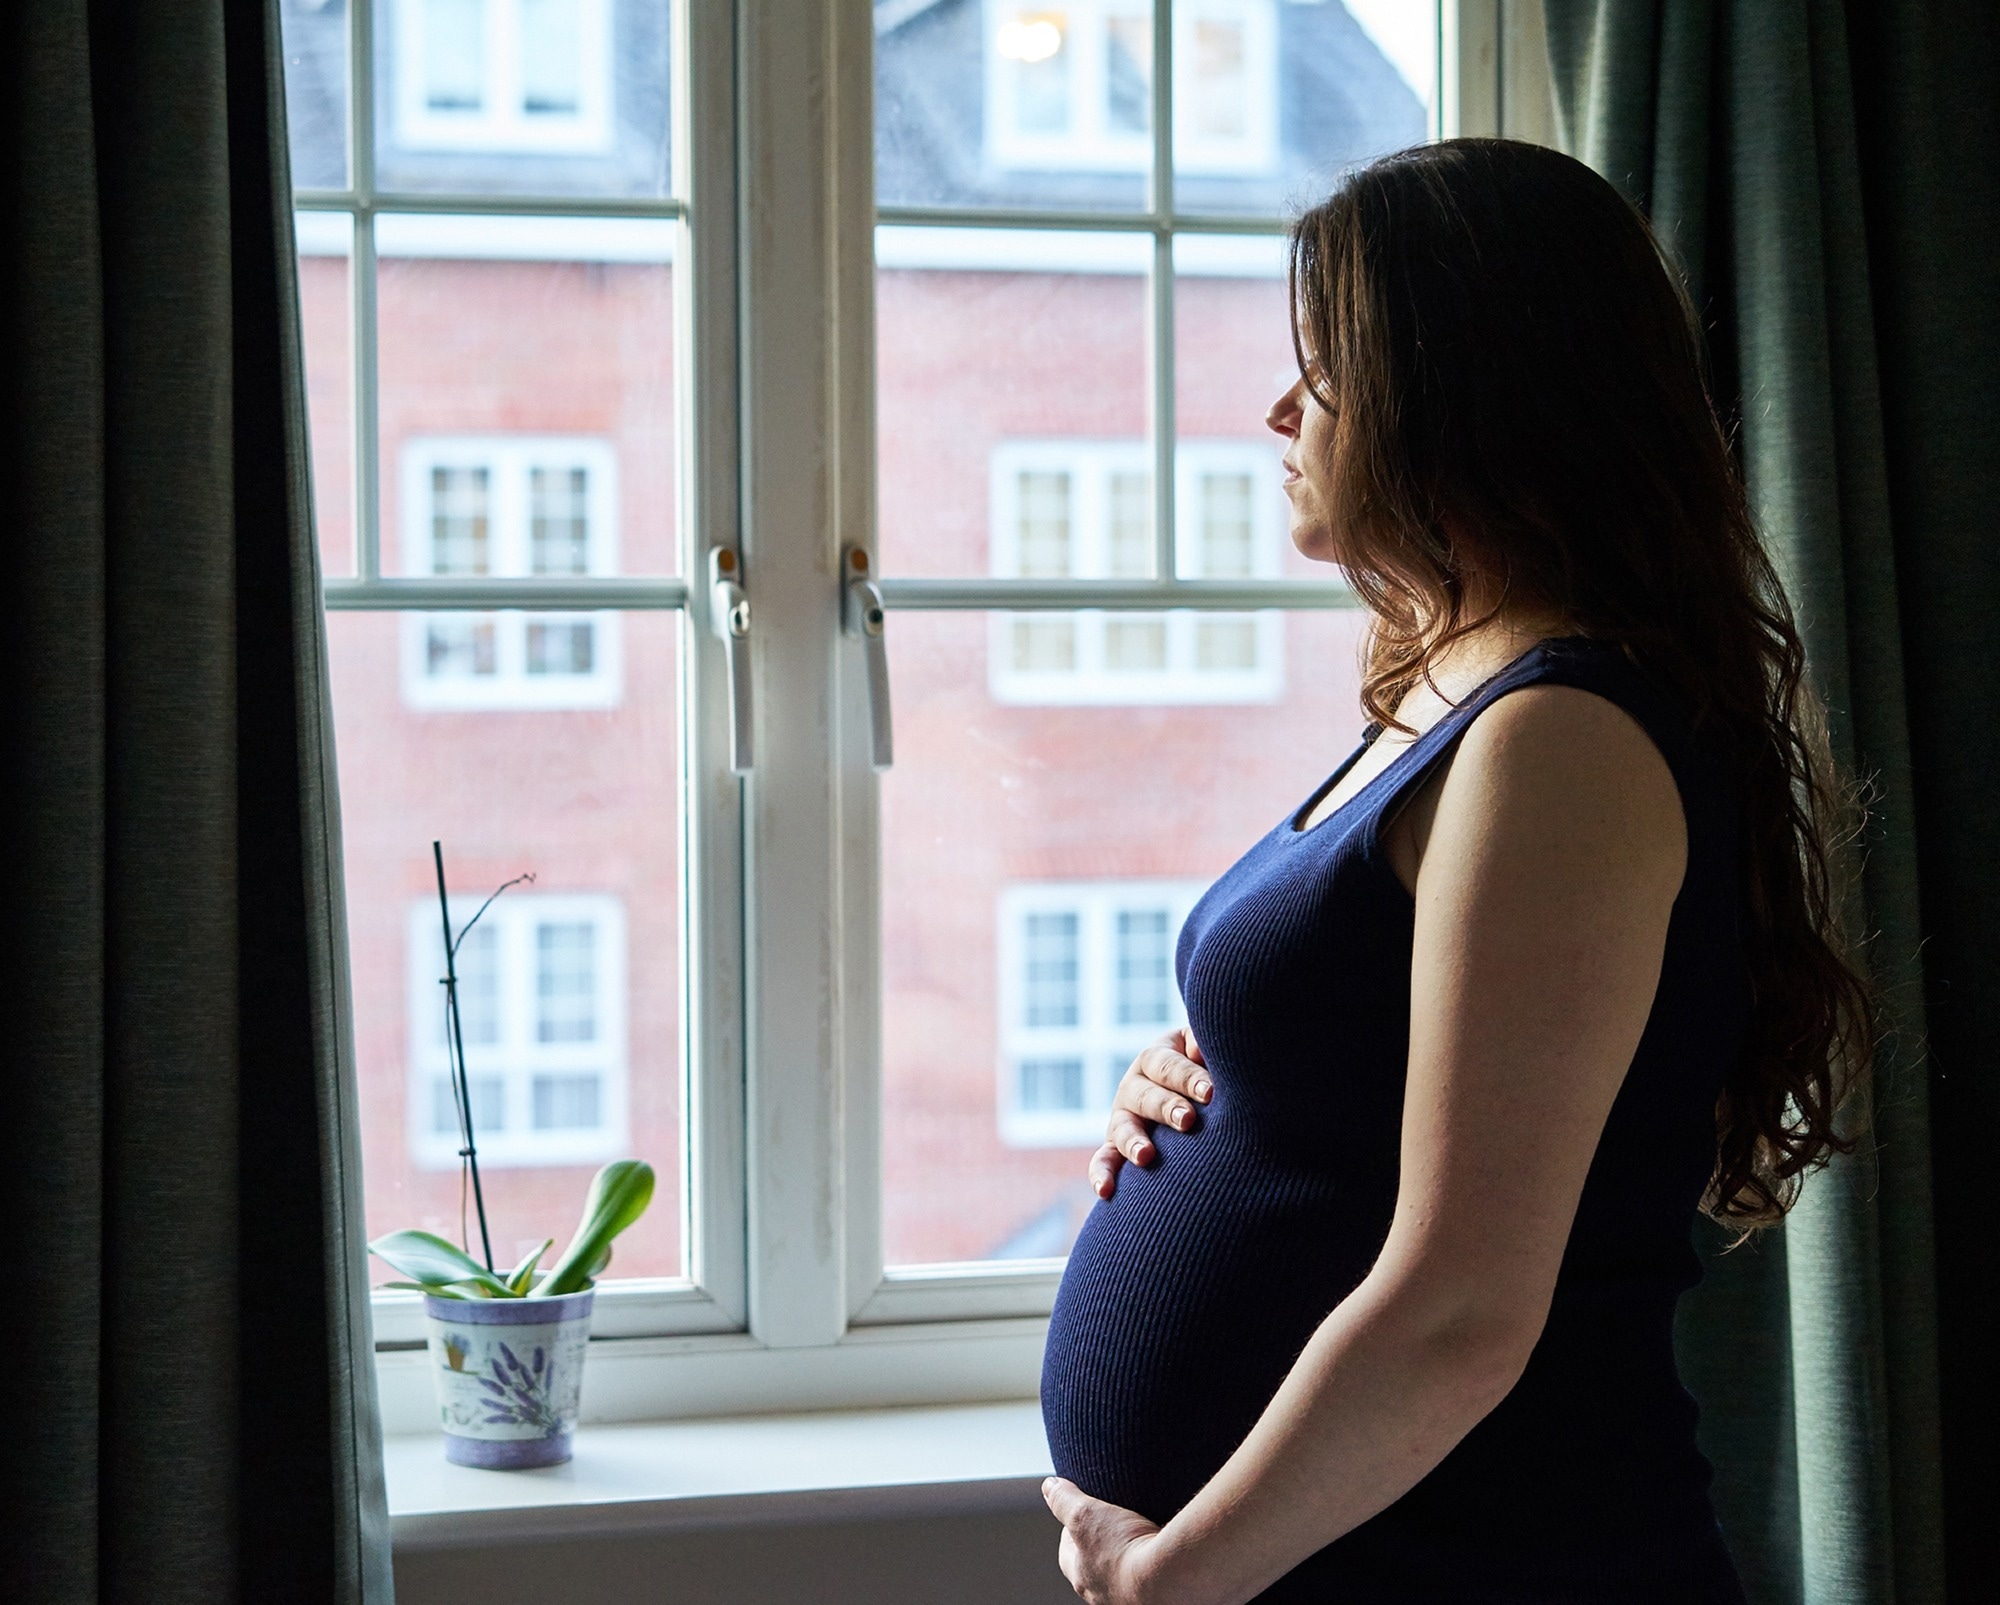 Study: Maternal mood, body image, and eating habits predict changes in feeding practices during the COVID-19 pandemic. Image Credit: Emituu/Shutterstock.com